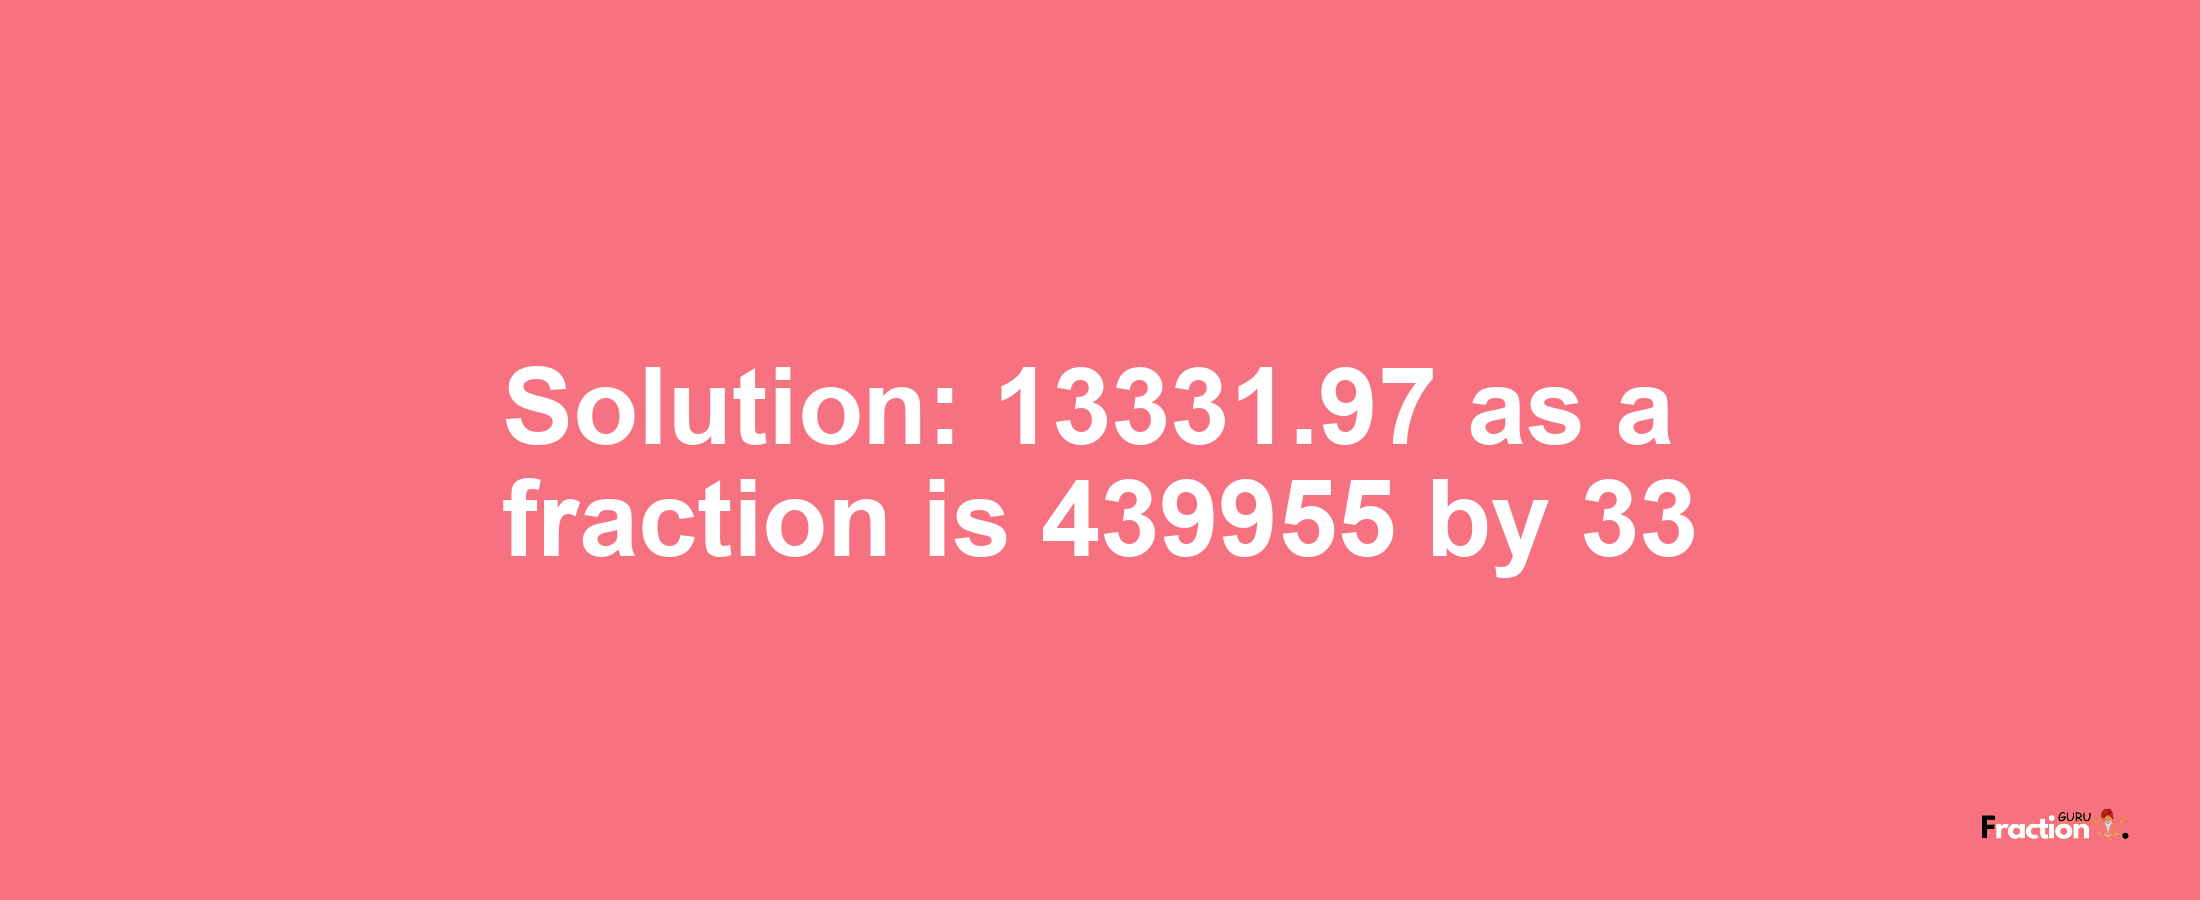 Solution:13331.97 as a fraction is 439955/33